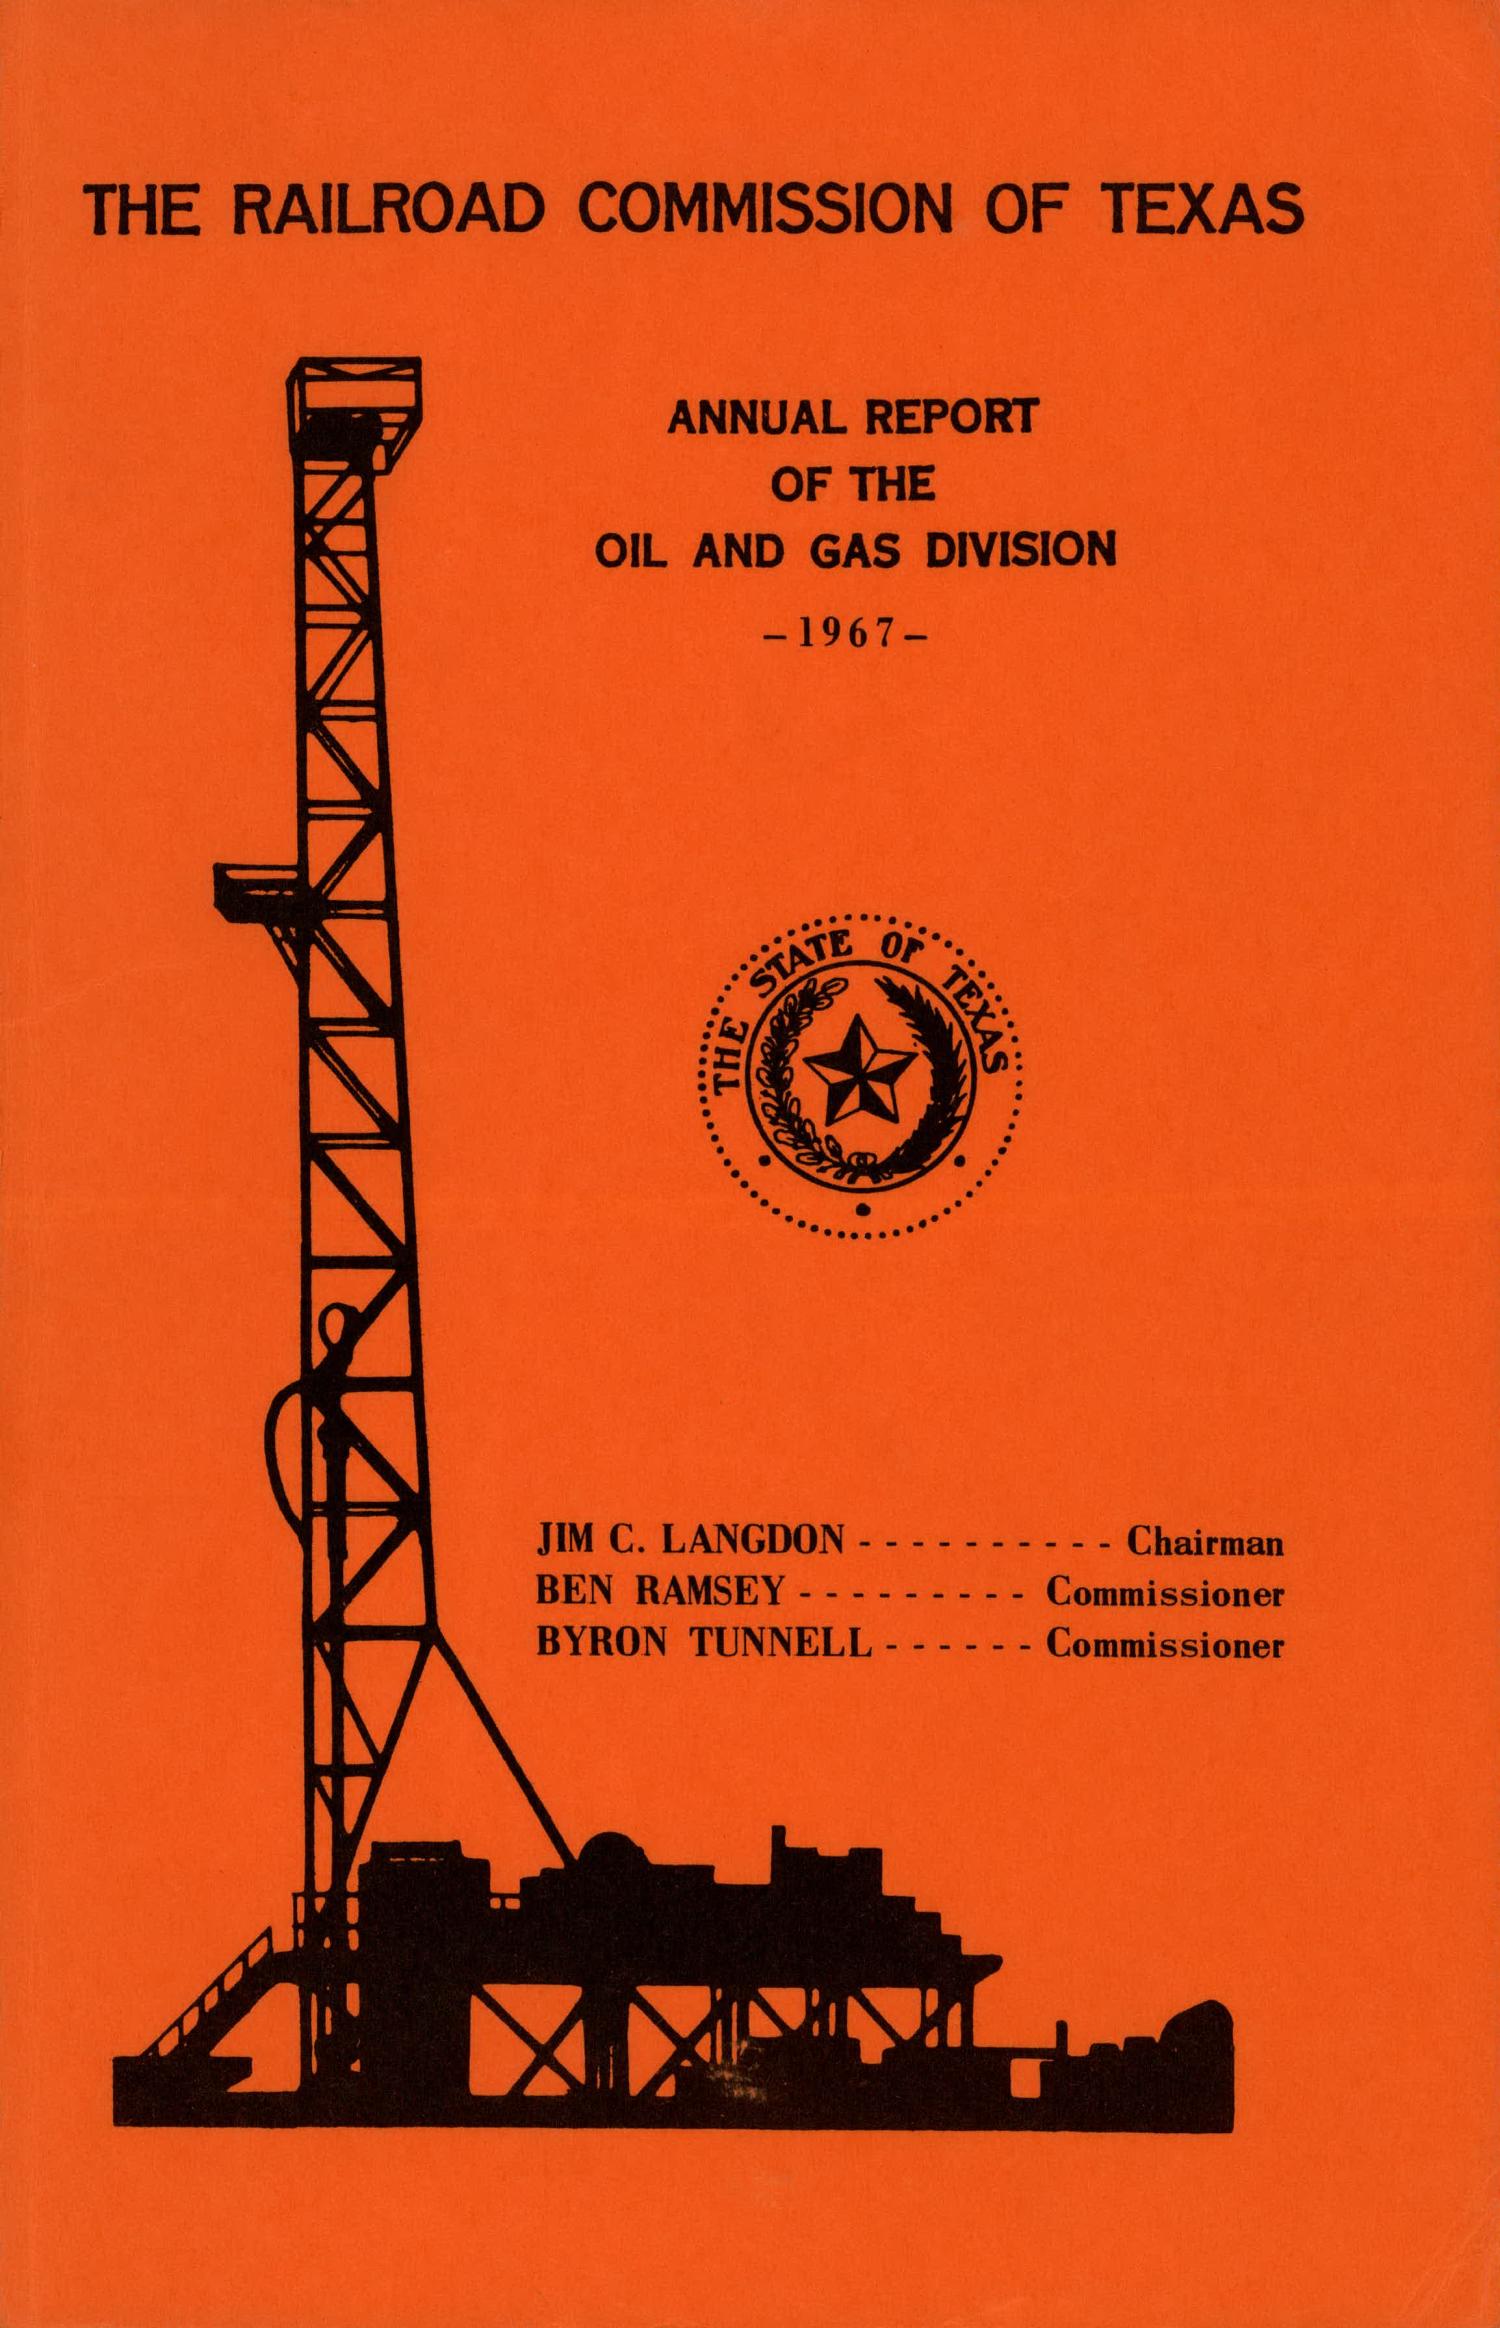 Railroad Commission of Texas Oil and Gas Division Annual Report: 1967
                                                
                                                    FRONT COVER
                                                